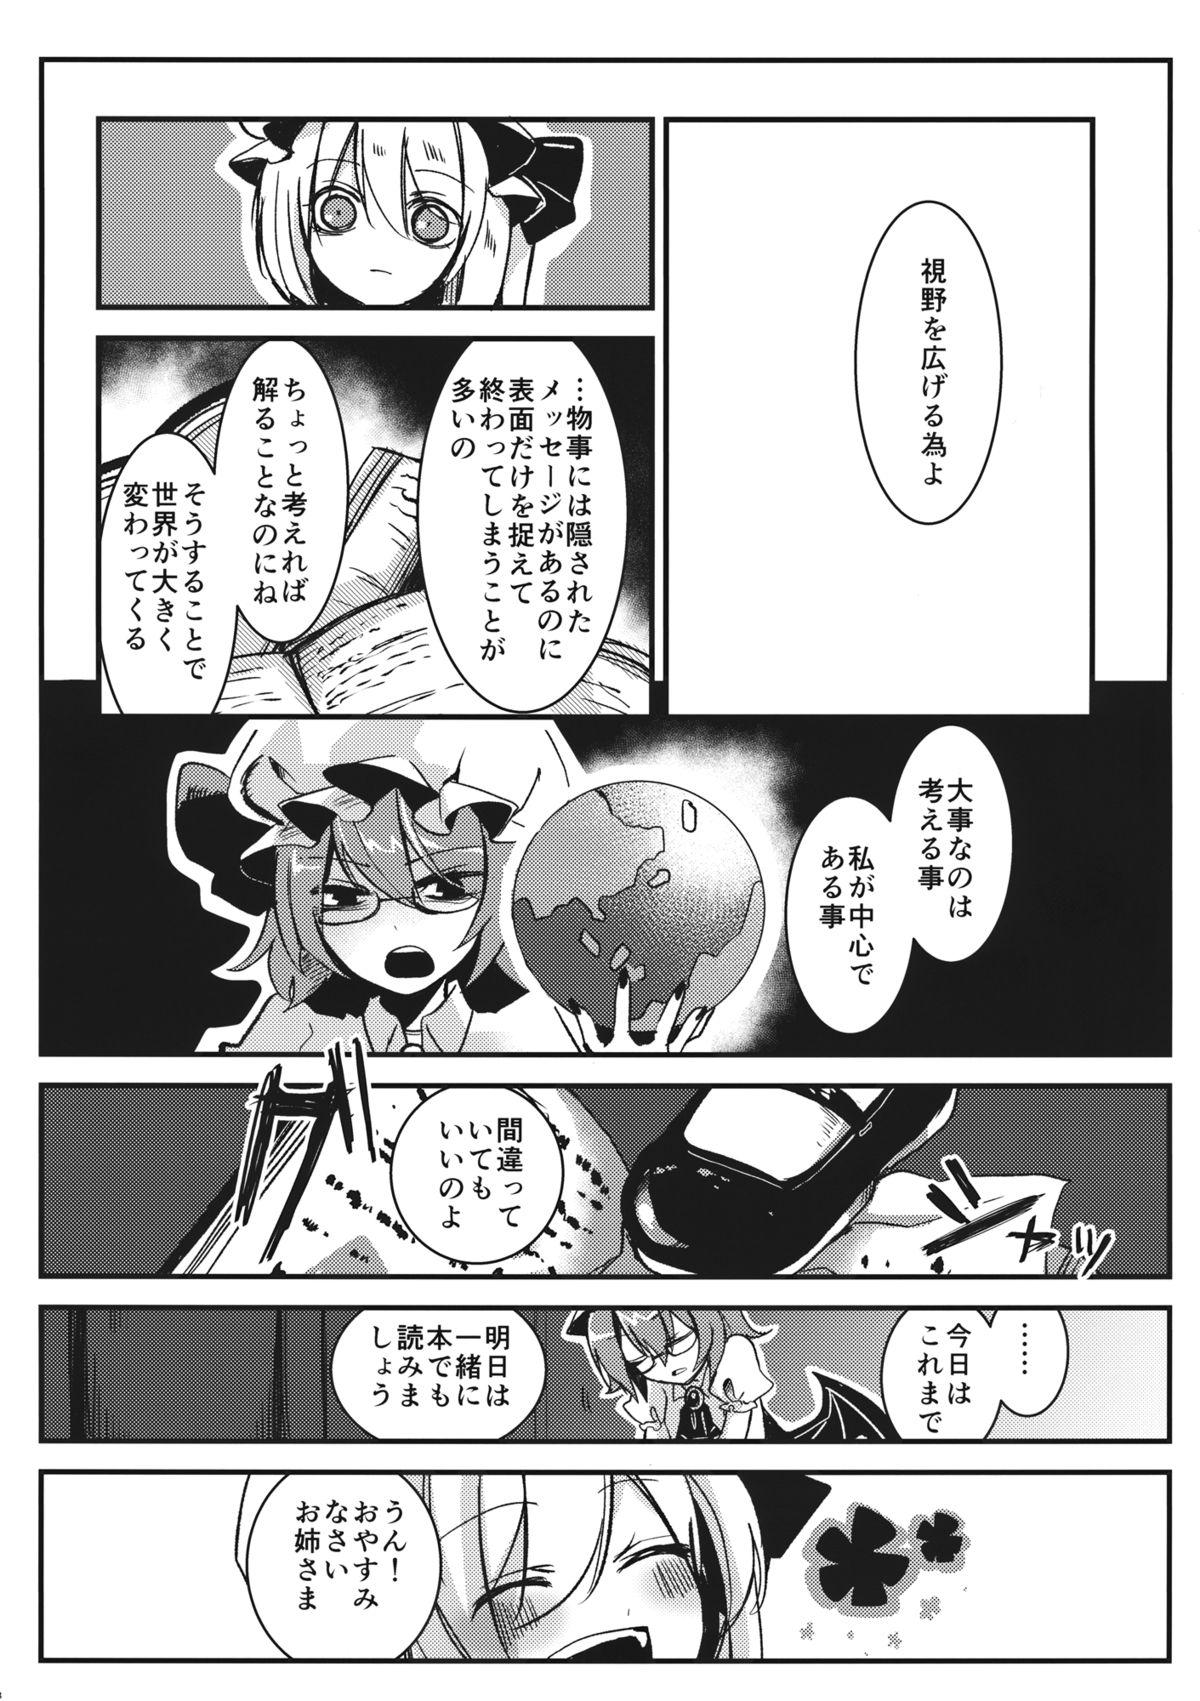 Amigos Eye - Touhou project Uncensored - Page 7